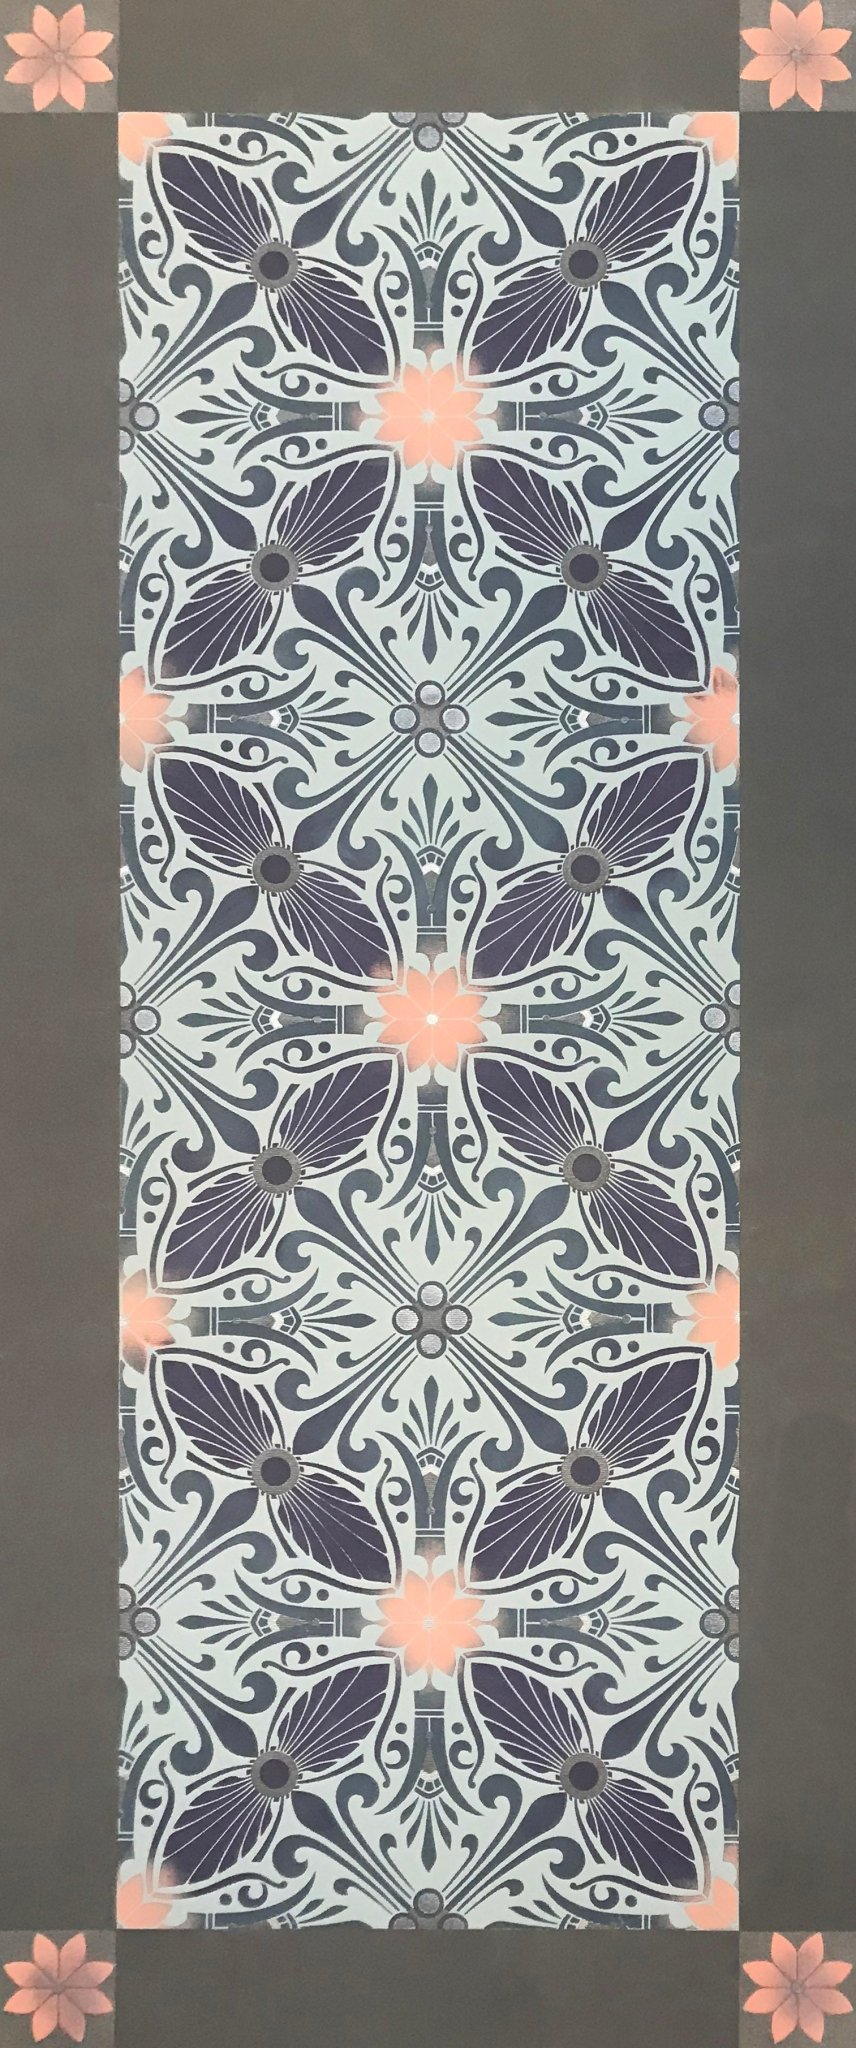 Full image of this floorcloth based on a Christopher Dresser pattern. THe palette employs compatible blue, purple, silver and pink.  